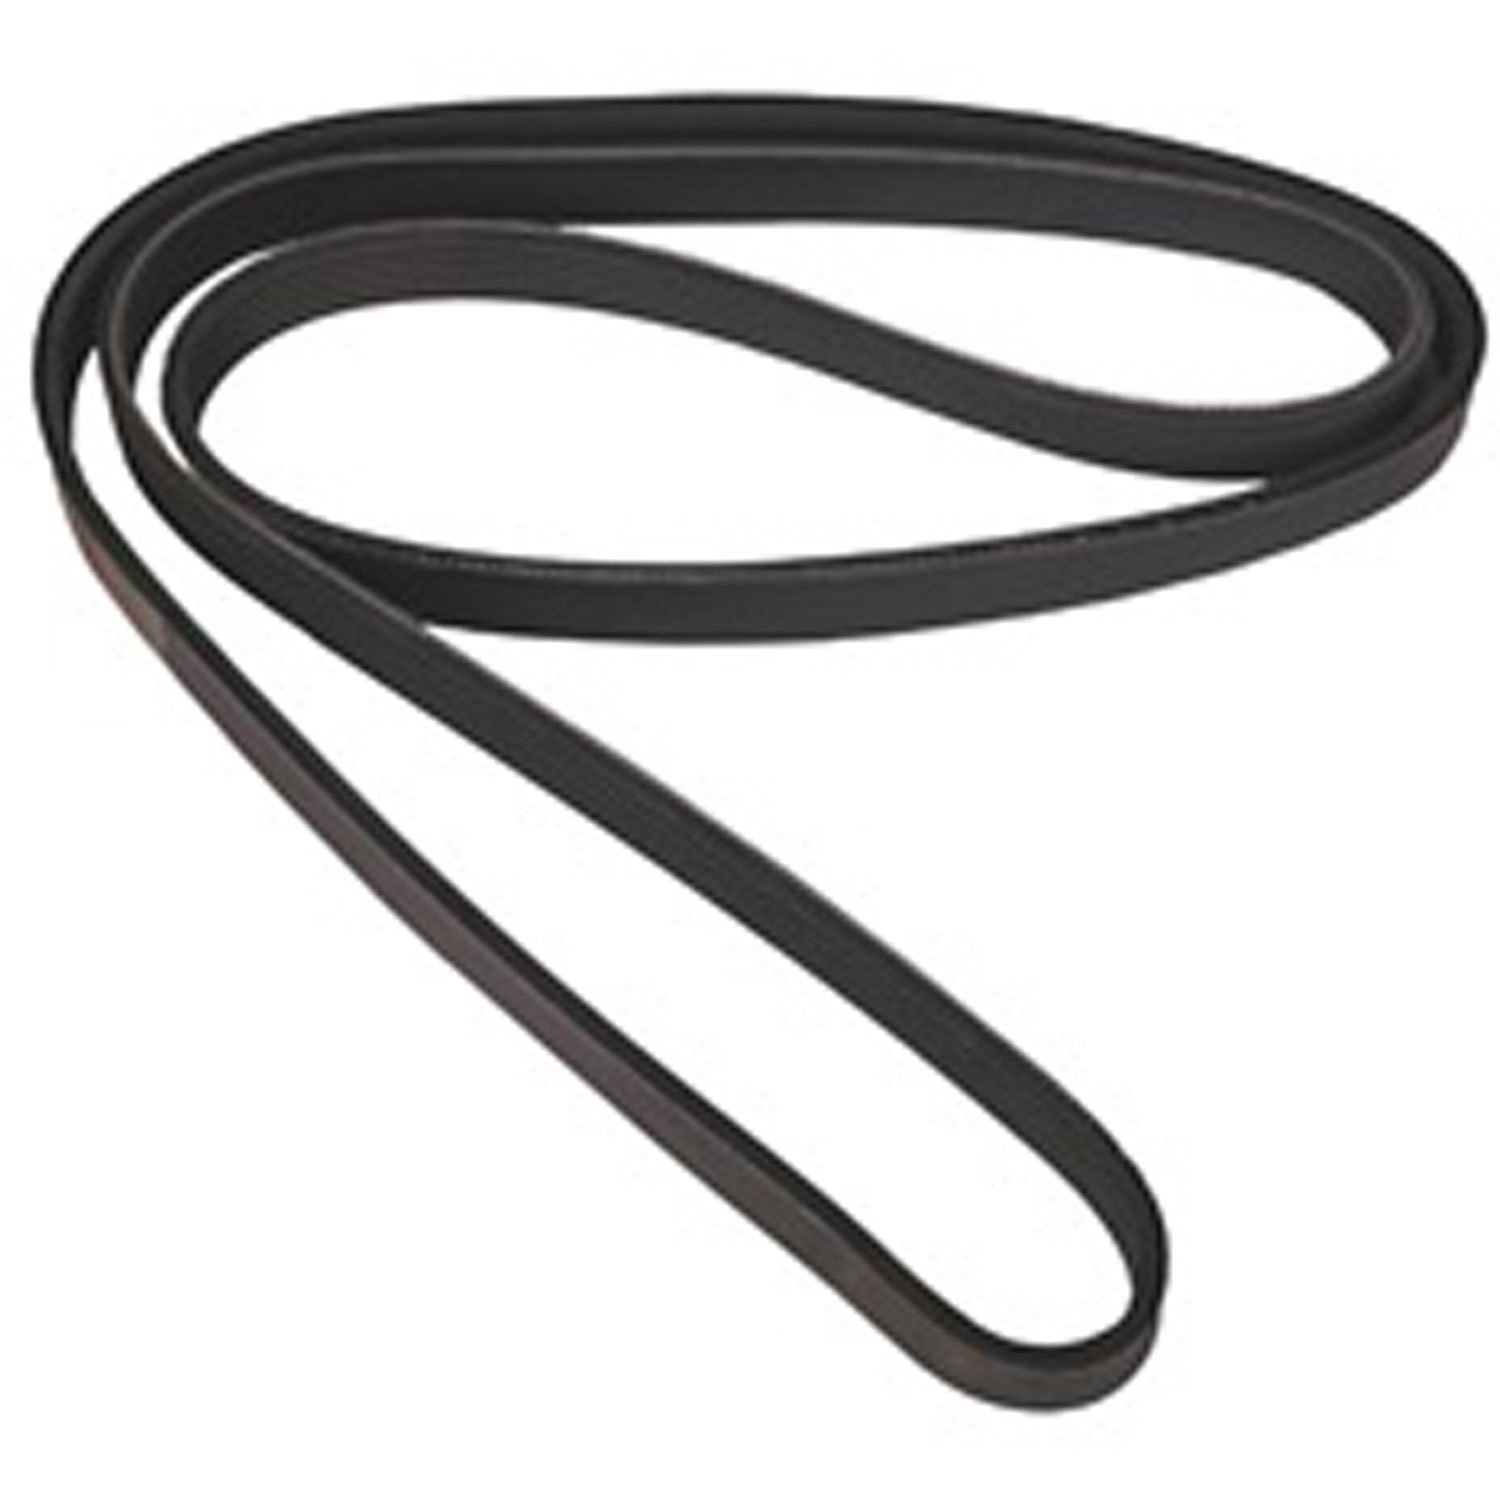 Stock replacement serpentine belt from Omix-ADA, Fits 97-02 Jeep Wrangler TJ with 2.5 liter